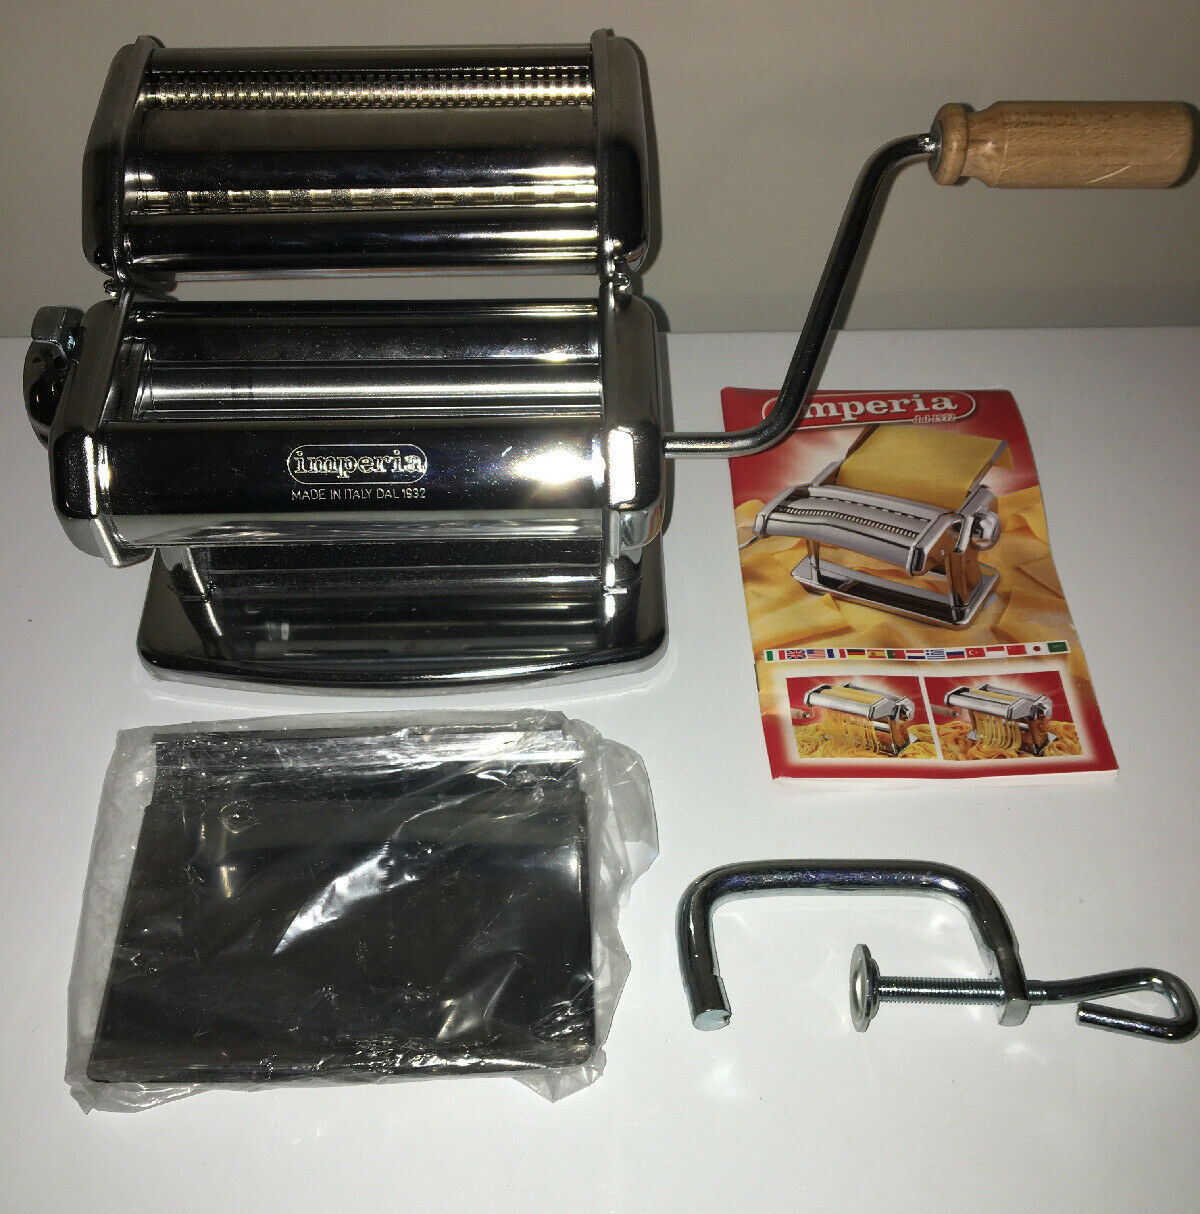 Used Imperia Dal 1932 Chrome Noodle Pasta Maker Machine With Wood Handle